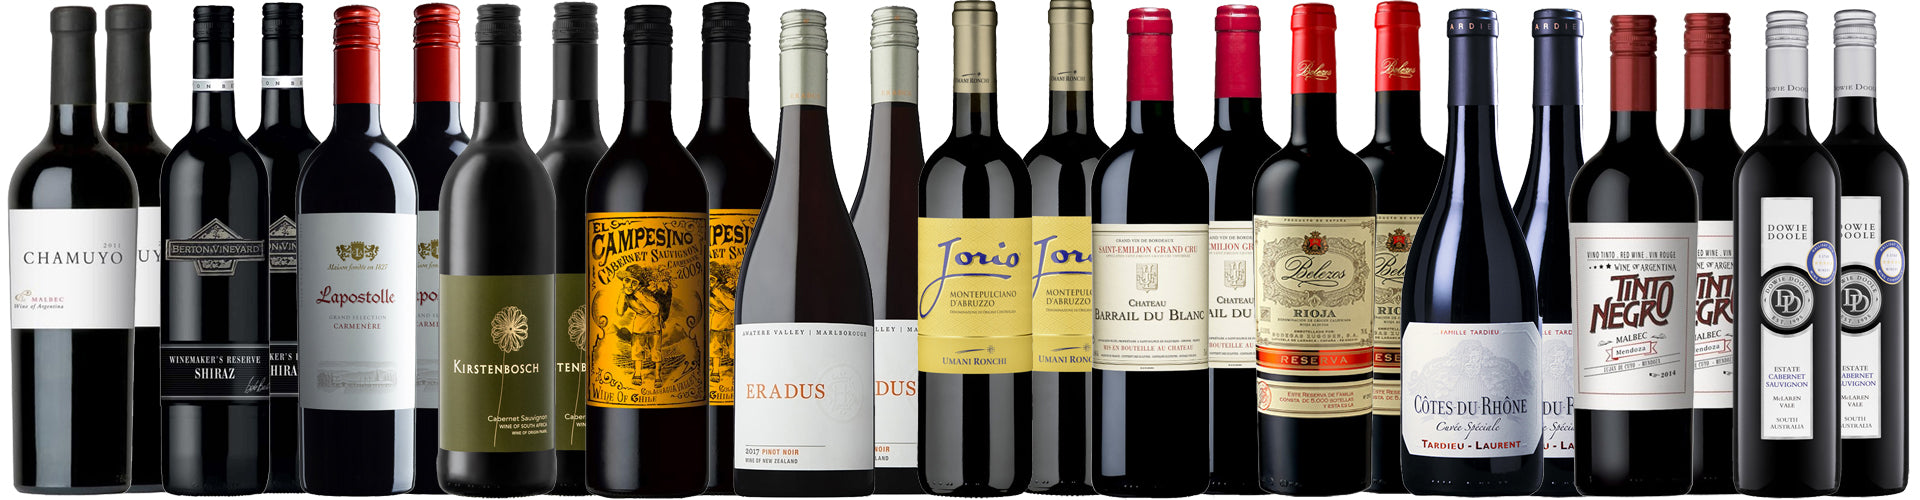 Mixed Collection of Red Wine Styles and Types